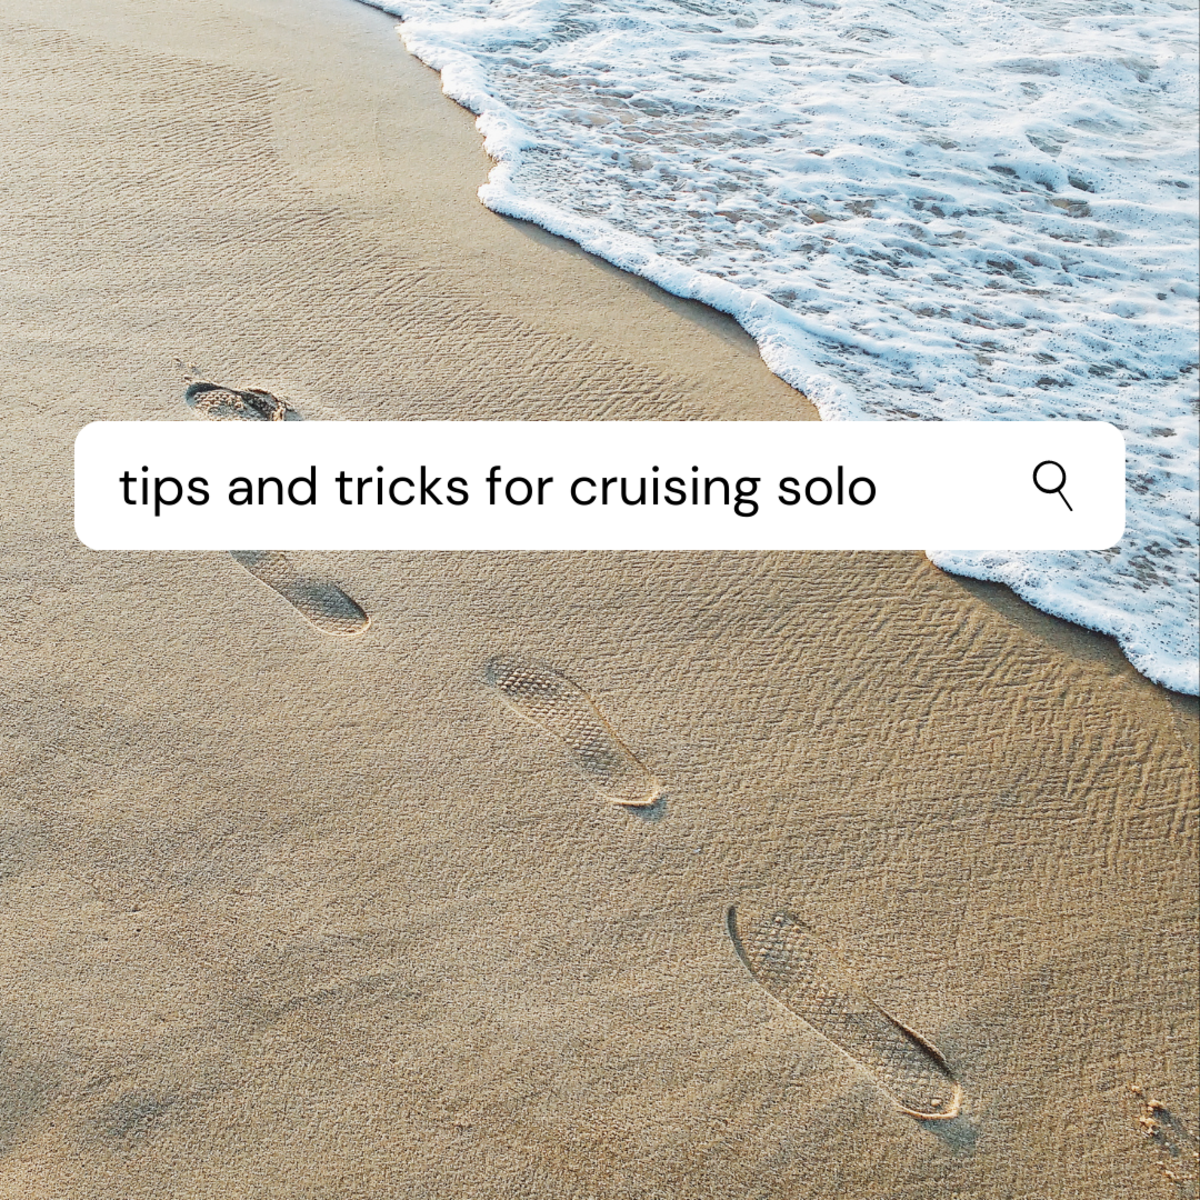 Top 10 Tips for Cruising Solo (and Having a Blast!)